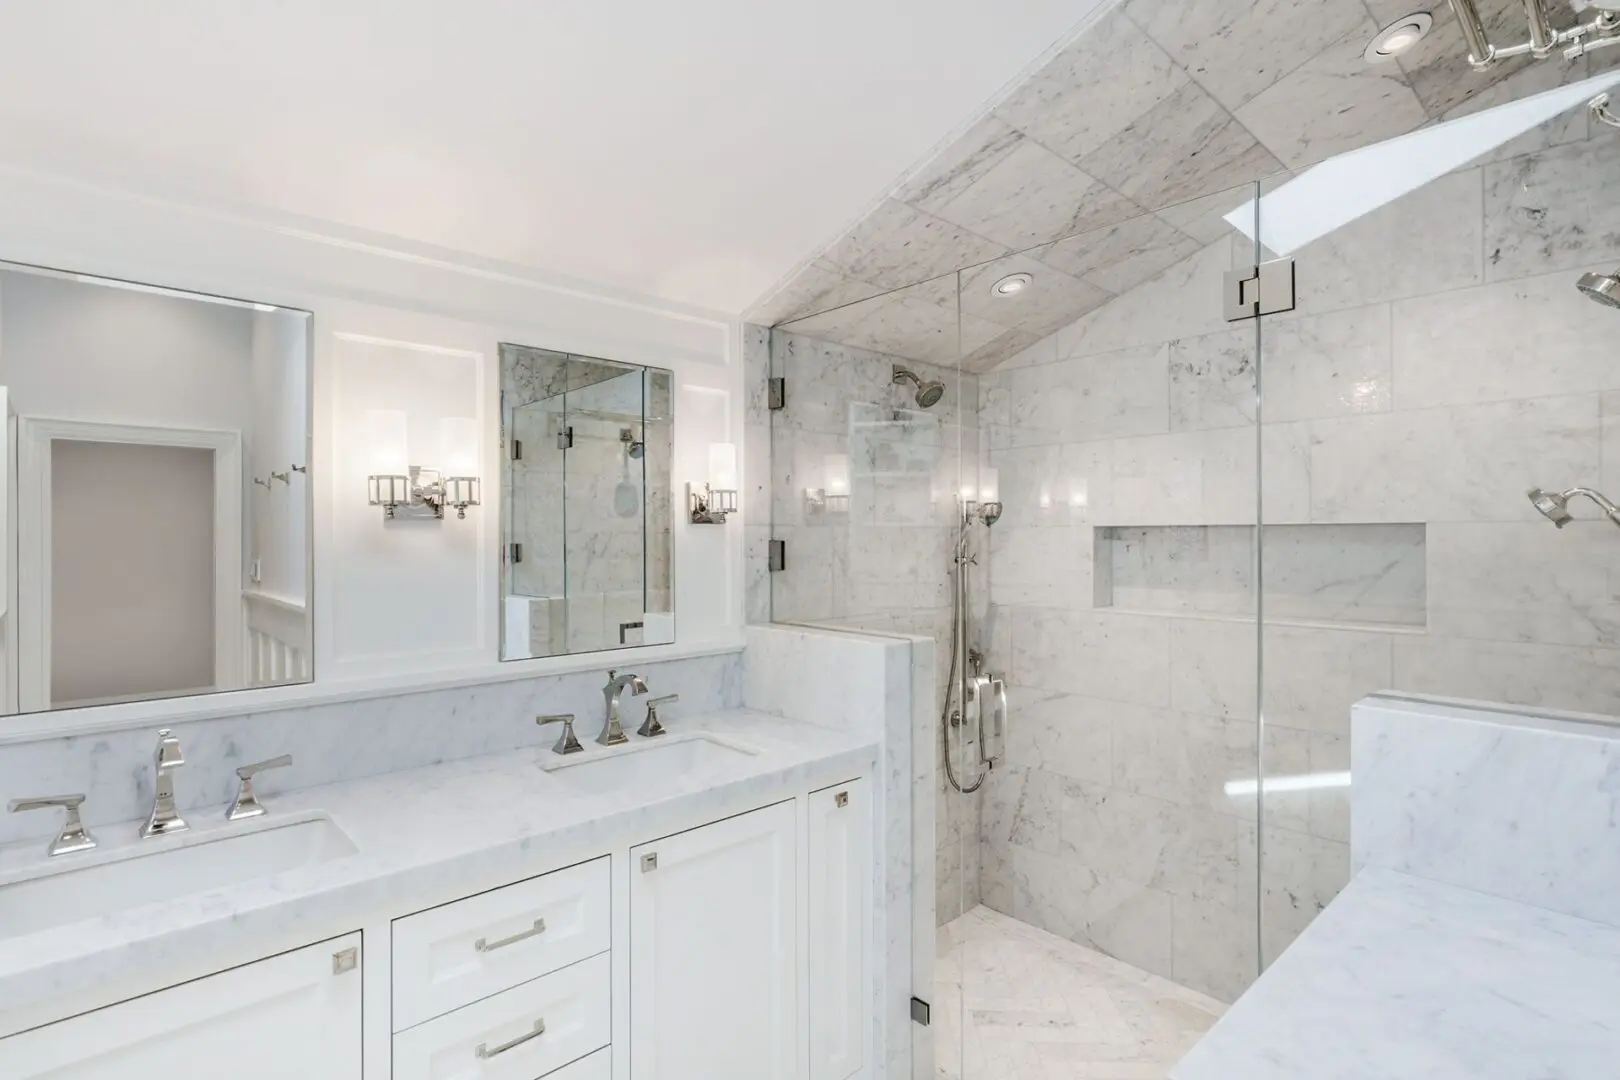 A bathroom with marble walls and floors, two sinks, and a large mirror.